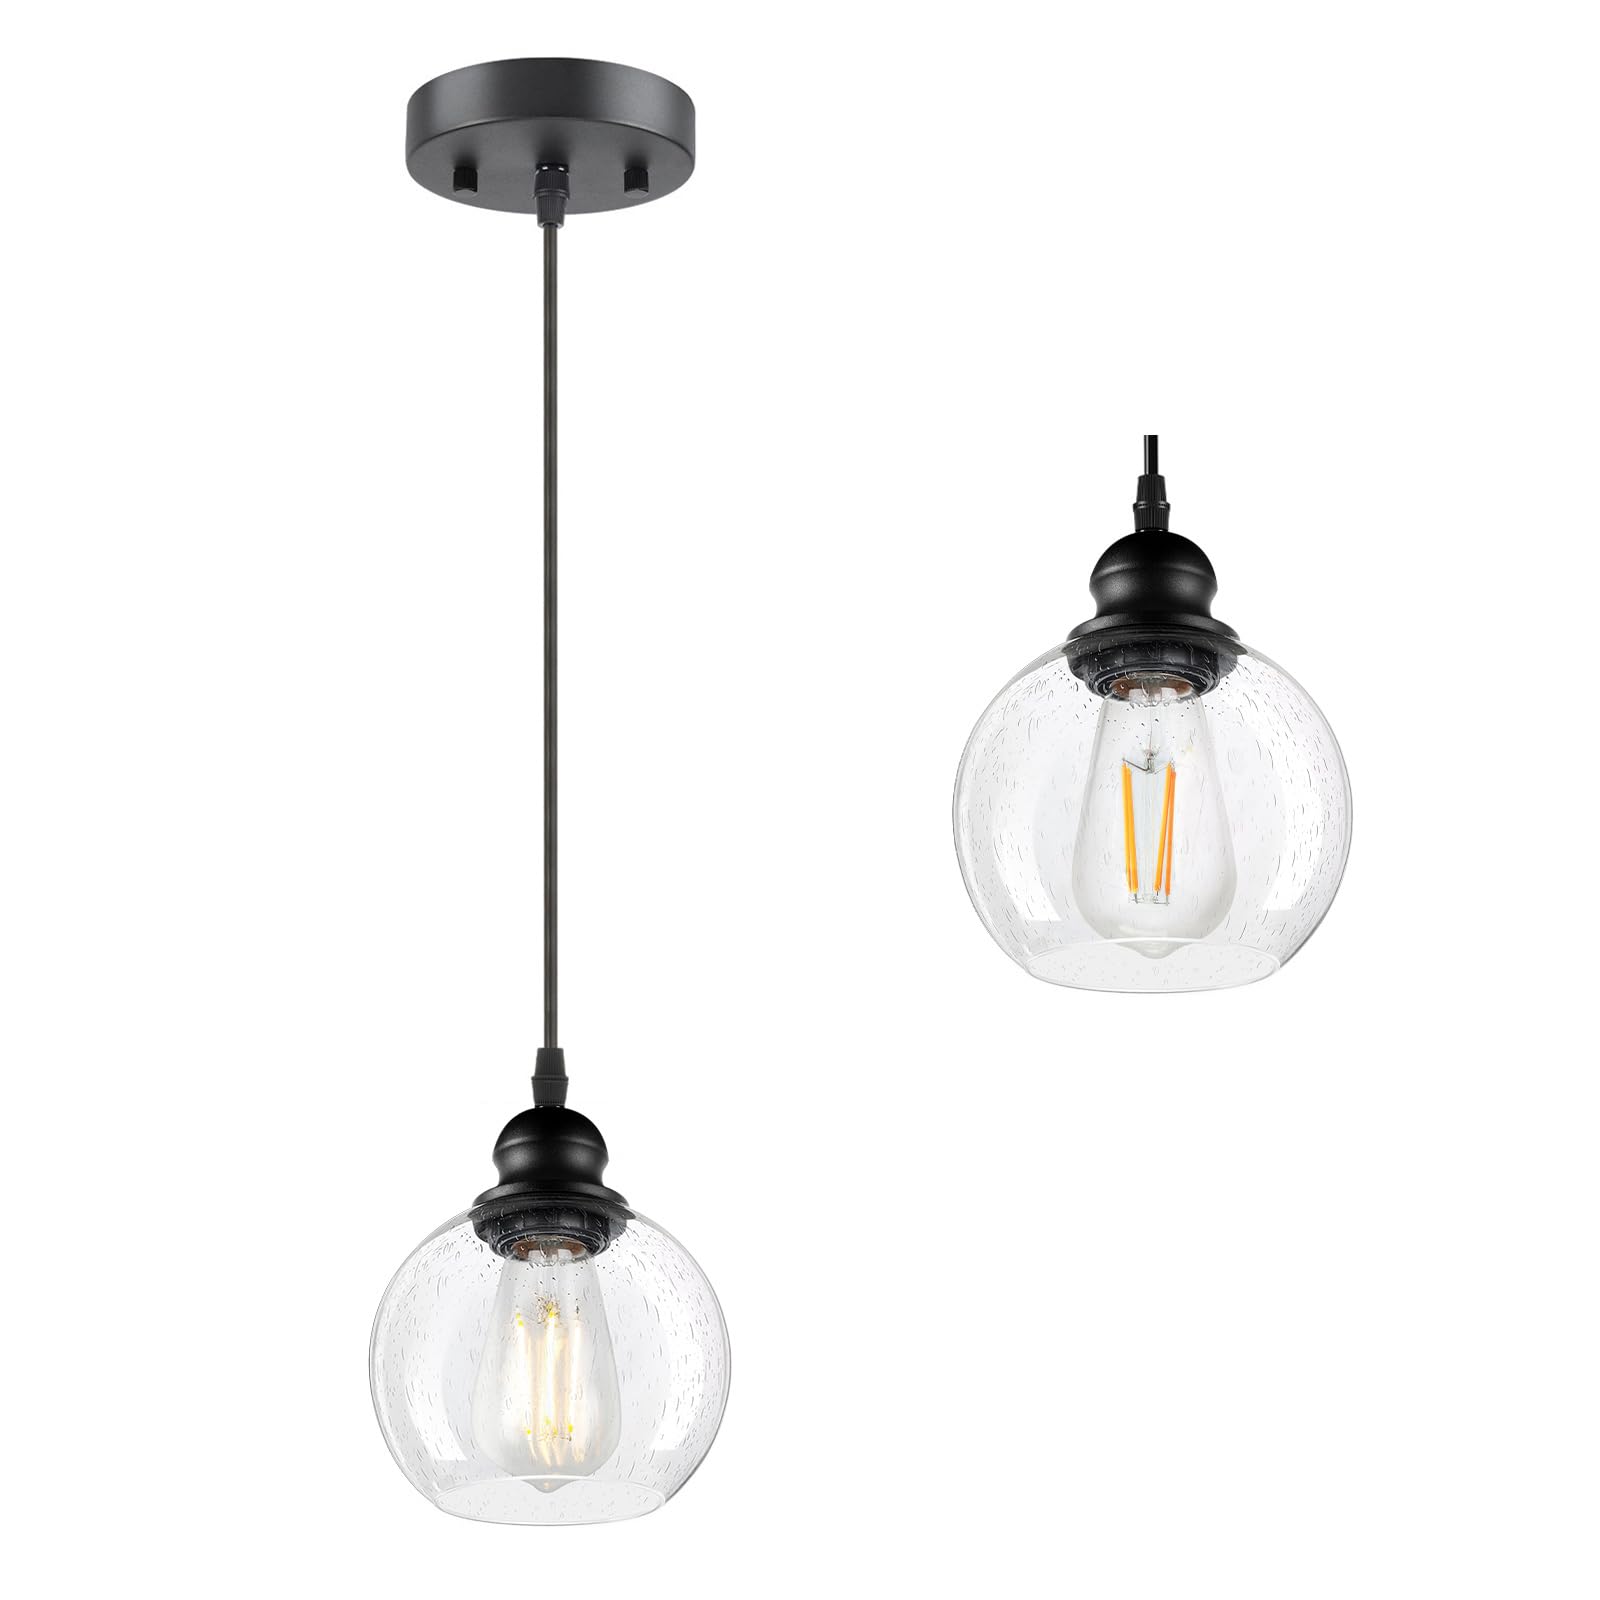 Modern Pendant Light Fixtures, Industrial Hanging Ceiling Lamp with Seeded Glass Shade, Vintage Black Pendant Lighting for Kitchen Island Living Room Hallway Bedroom Dining Hall Office Sink Farmhouse